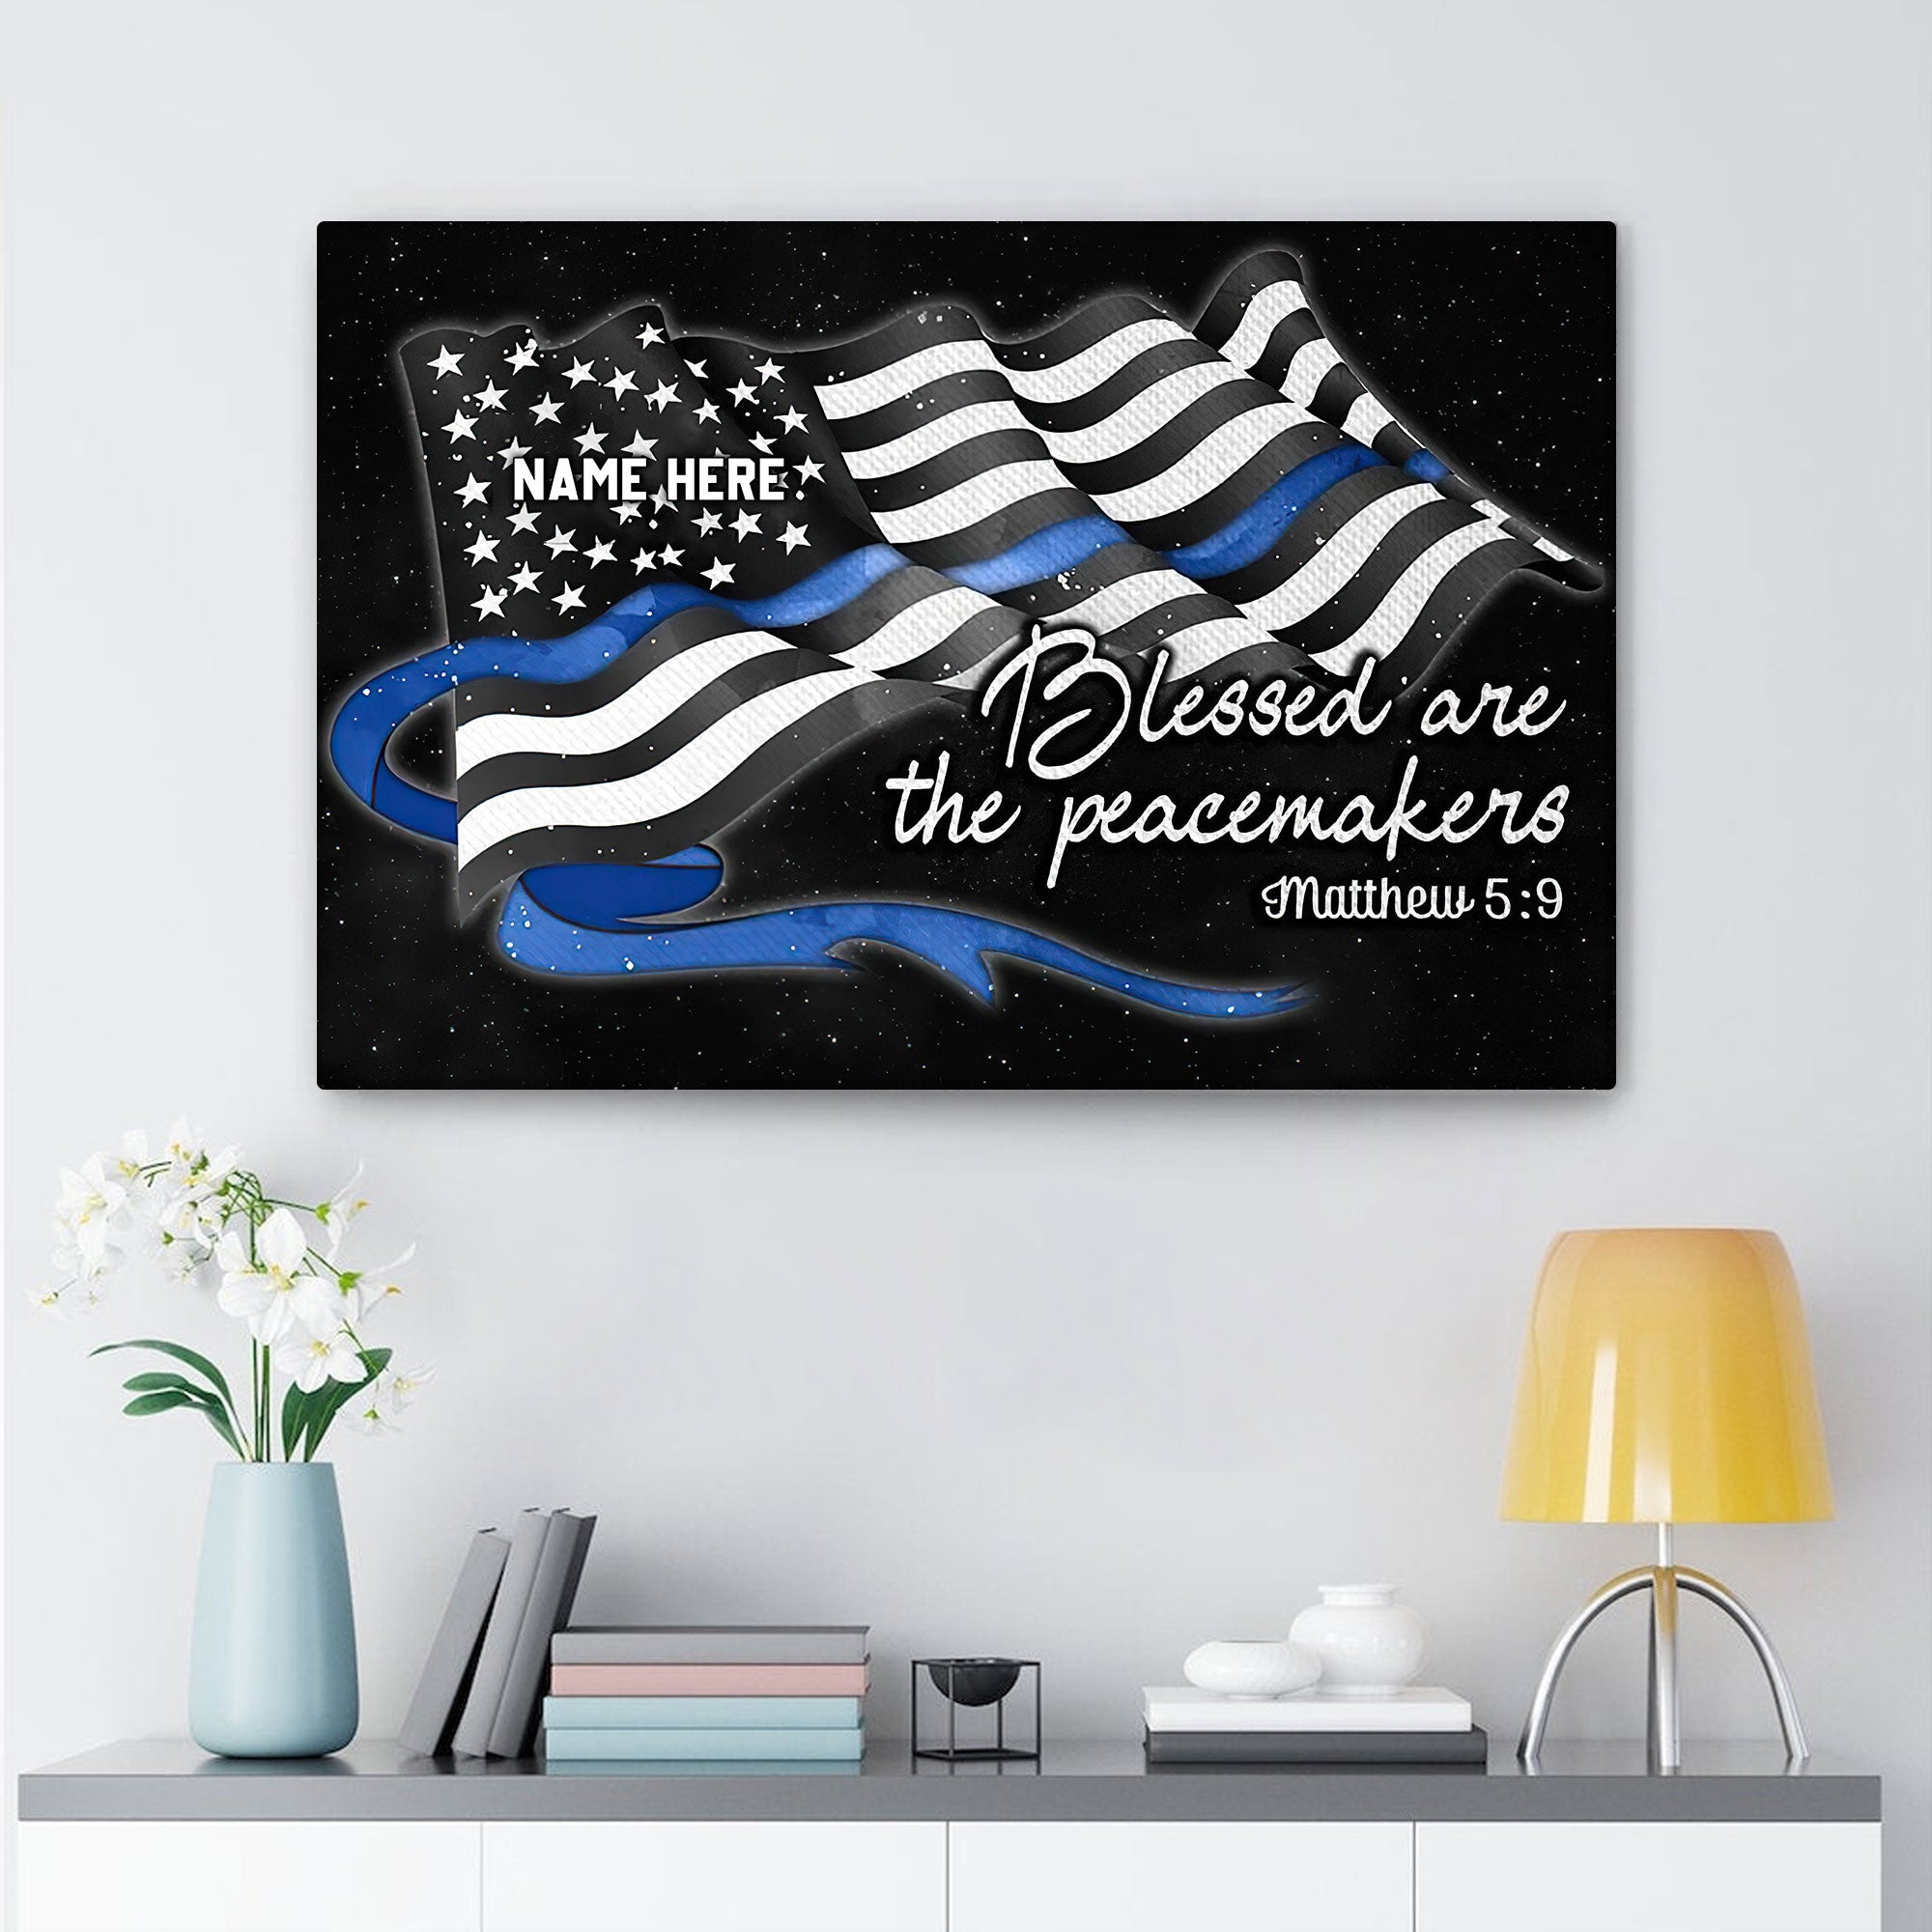 Personalized Canvas  American Flag With Thin Blue Line